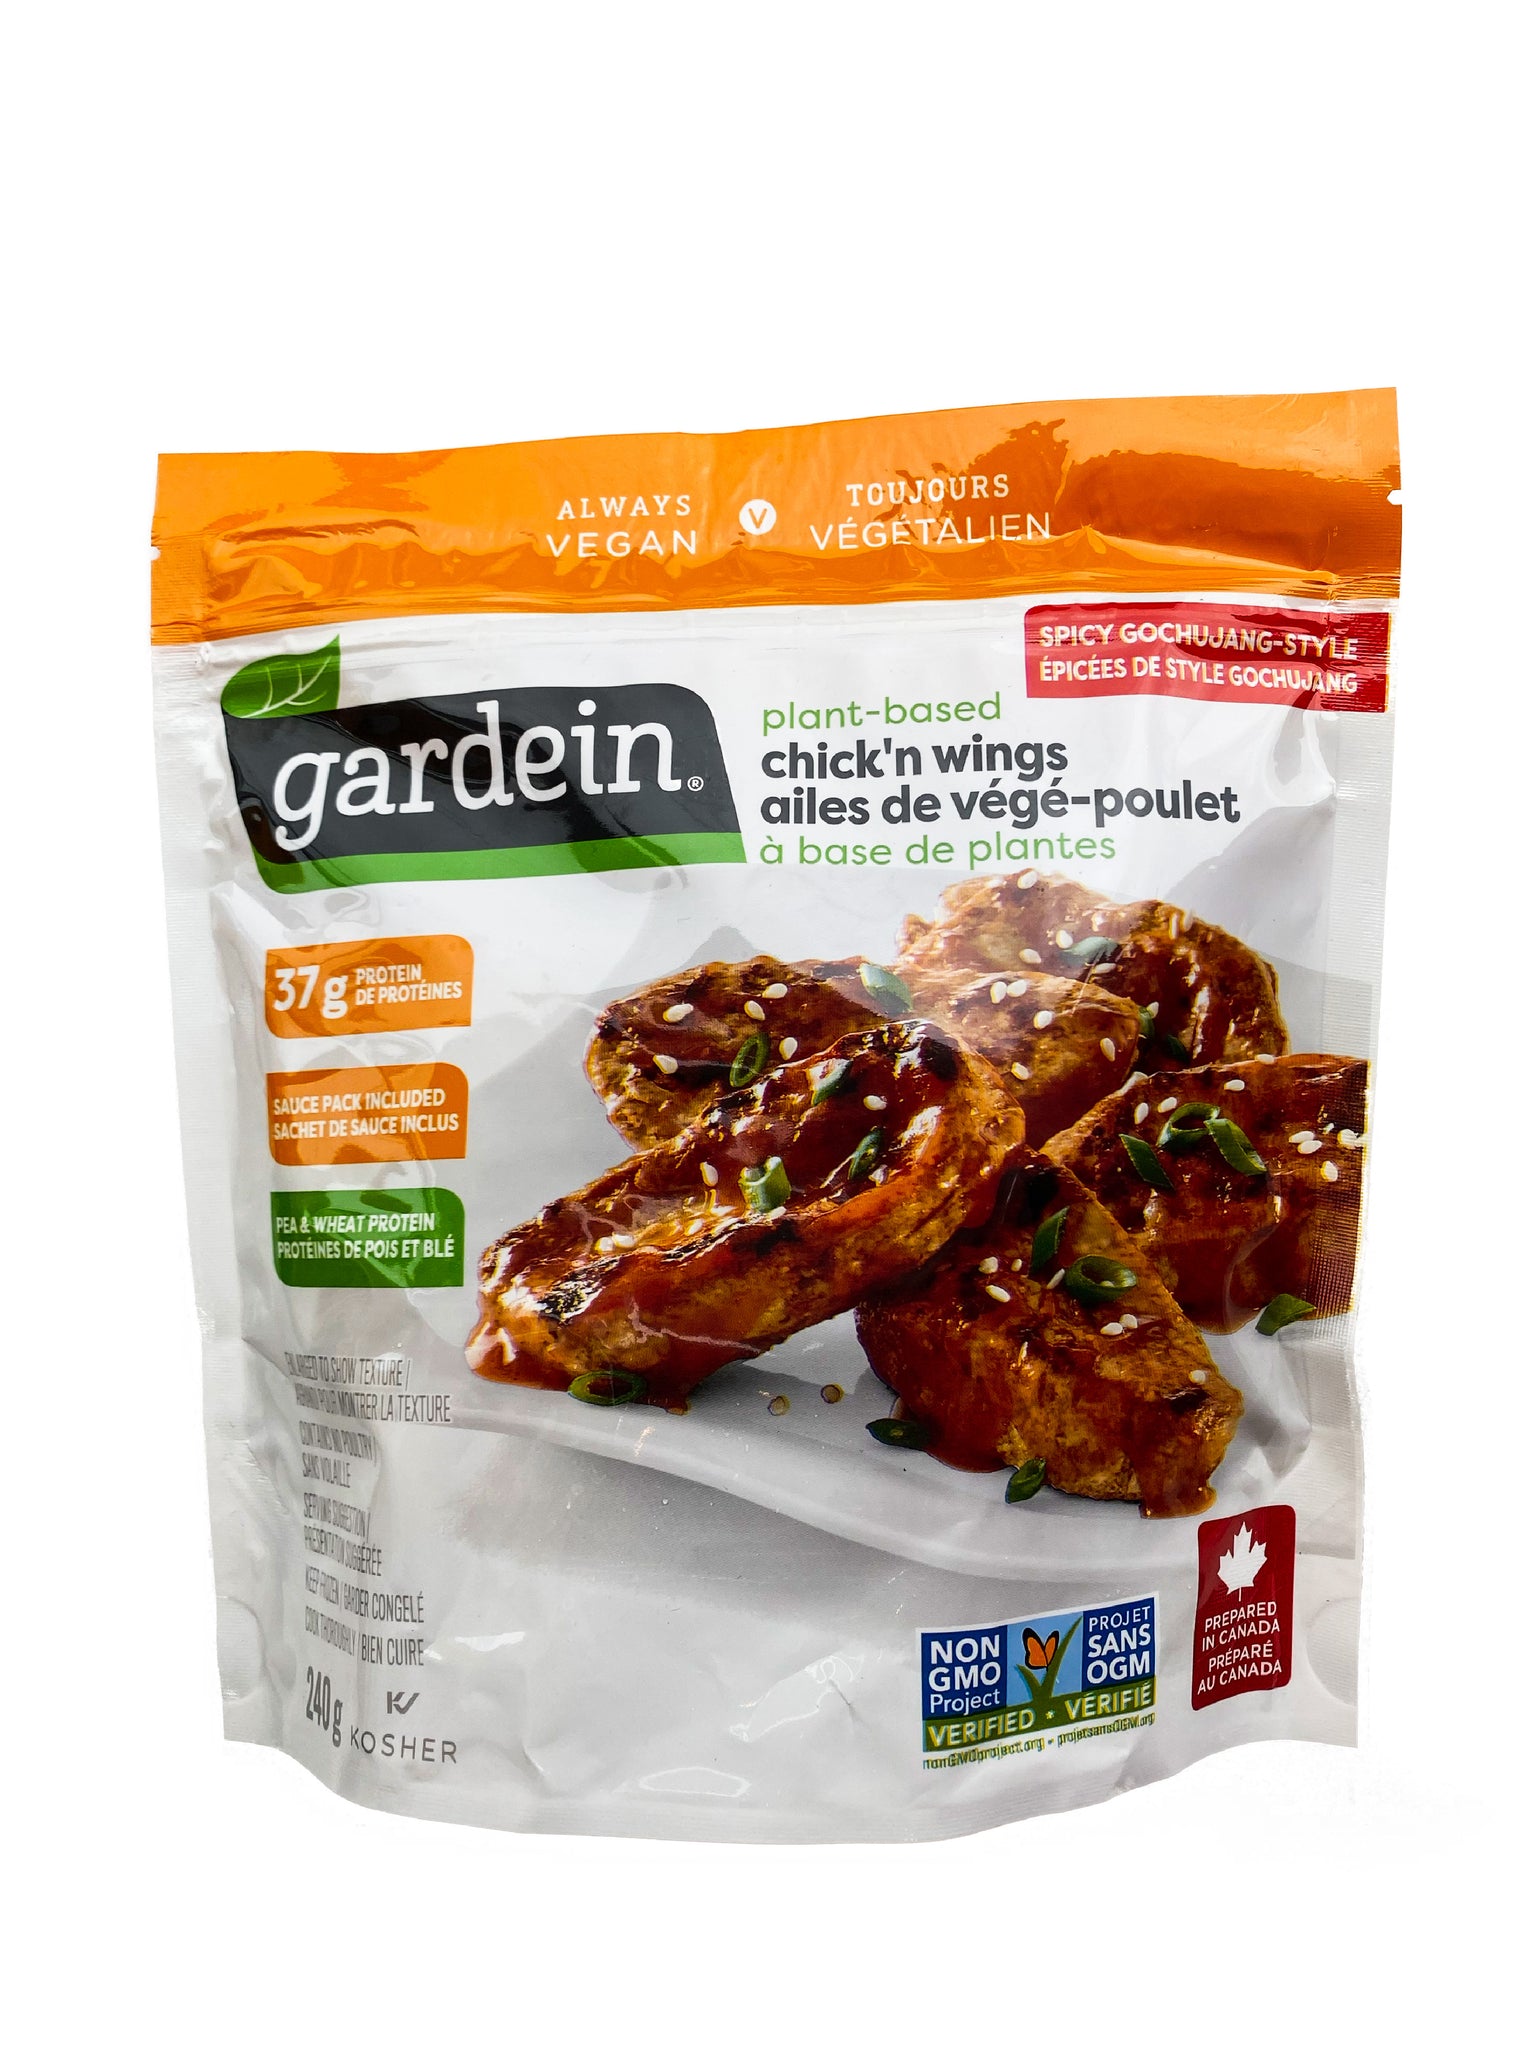 Gardein Spicy Gochujang Style Chick’n Wings